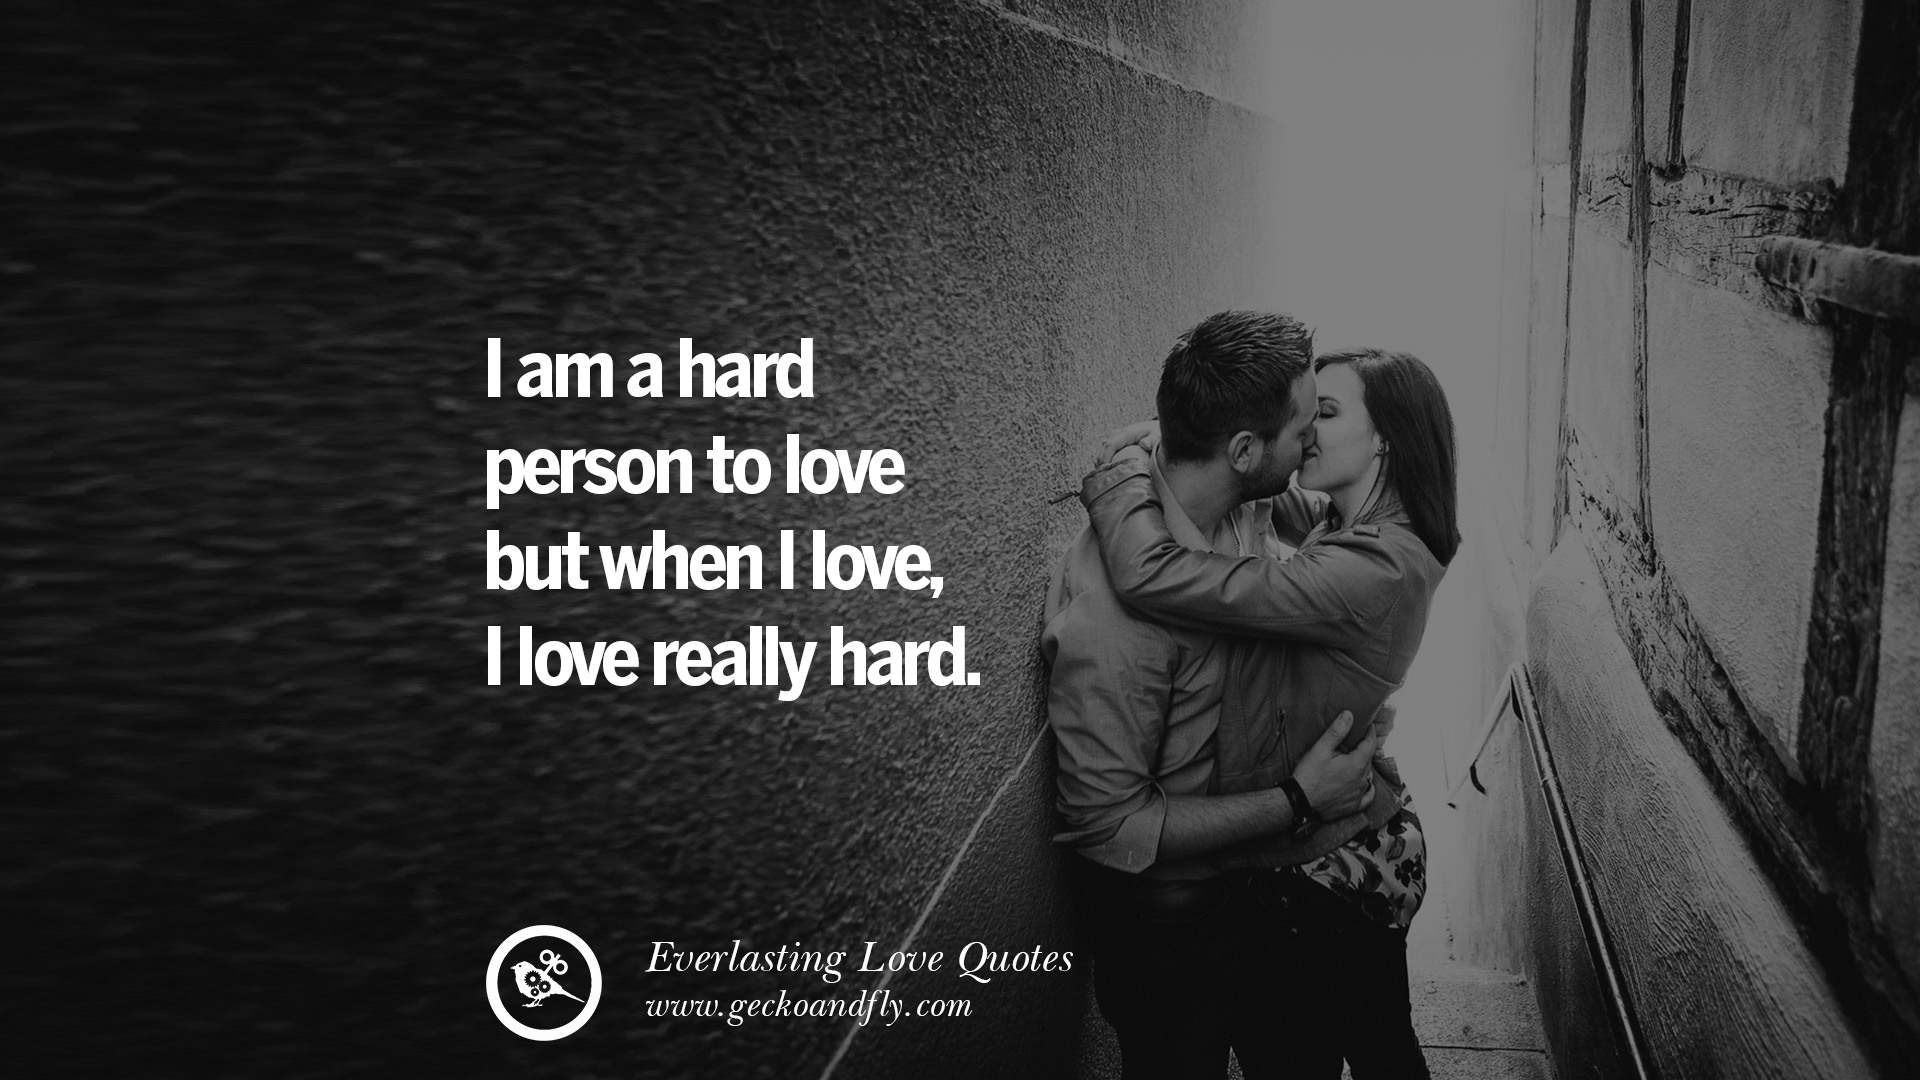 Download 18 Romantic Love Quotes For Him And Her On Valentine Day